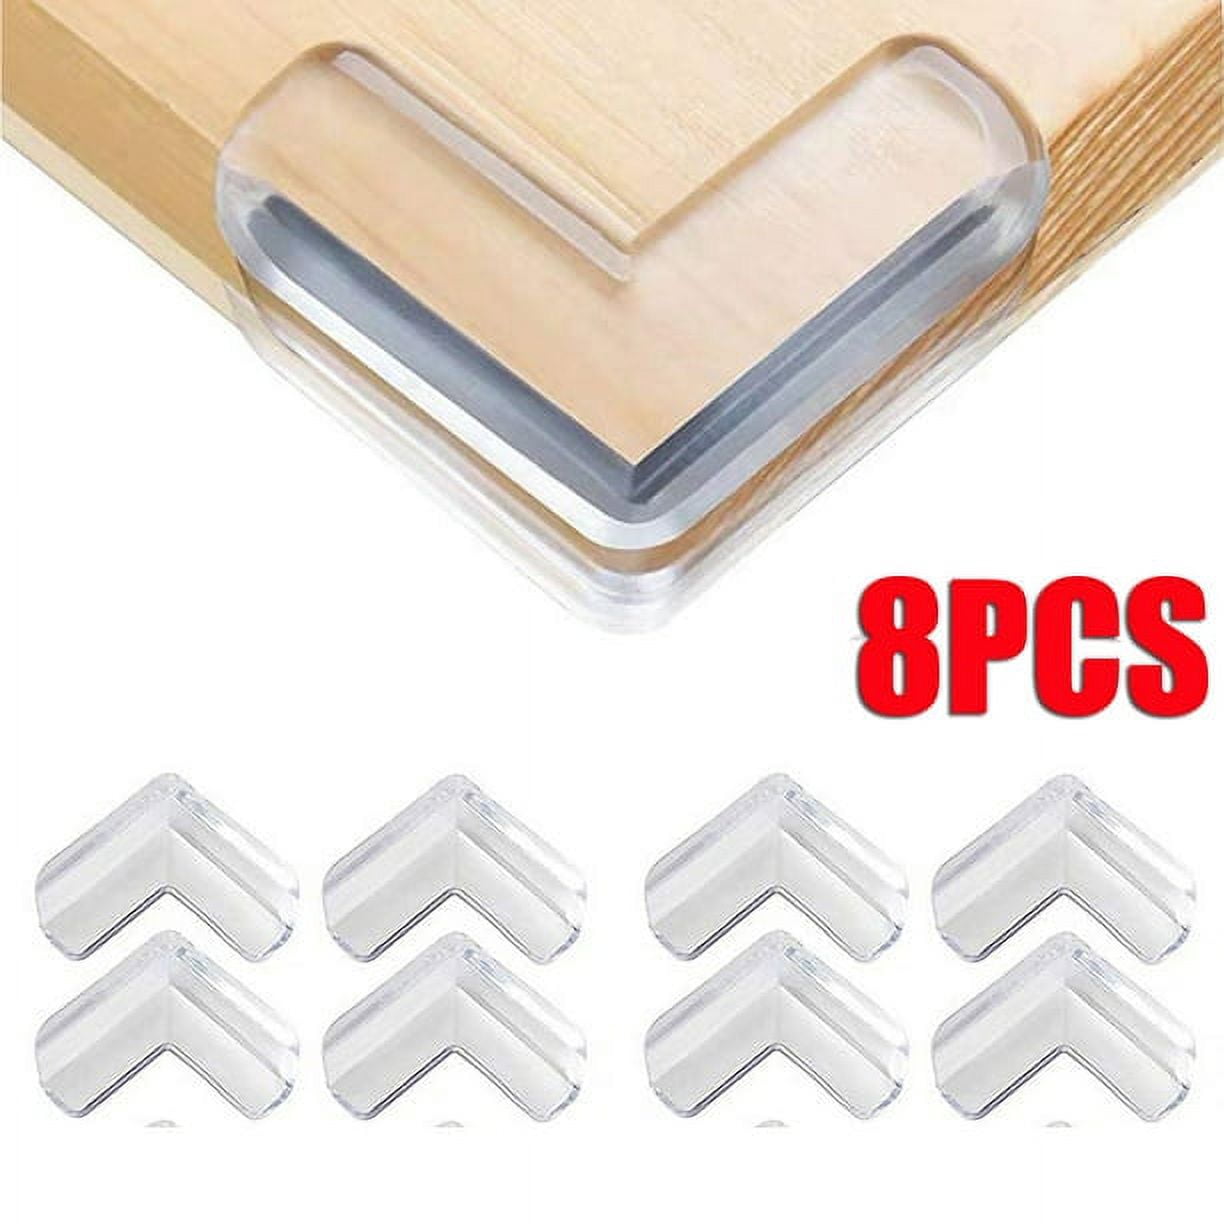 8PCS Foam Edge Corner Guard Table Protector Baby Safety Furniture